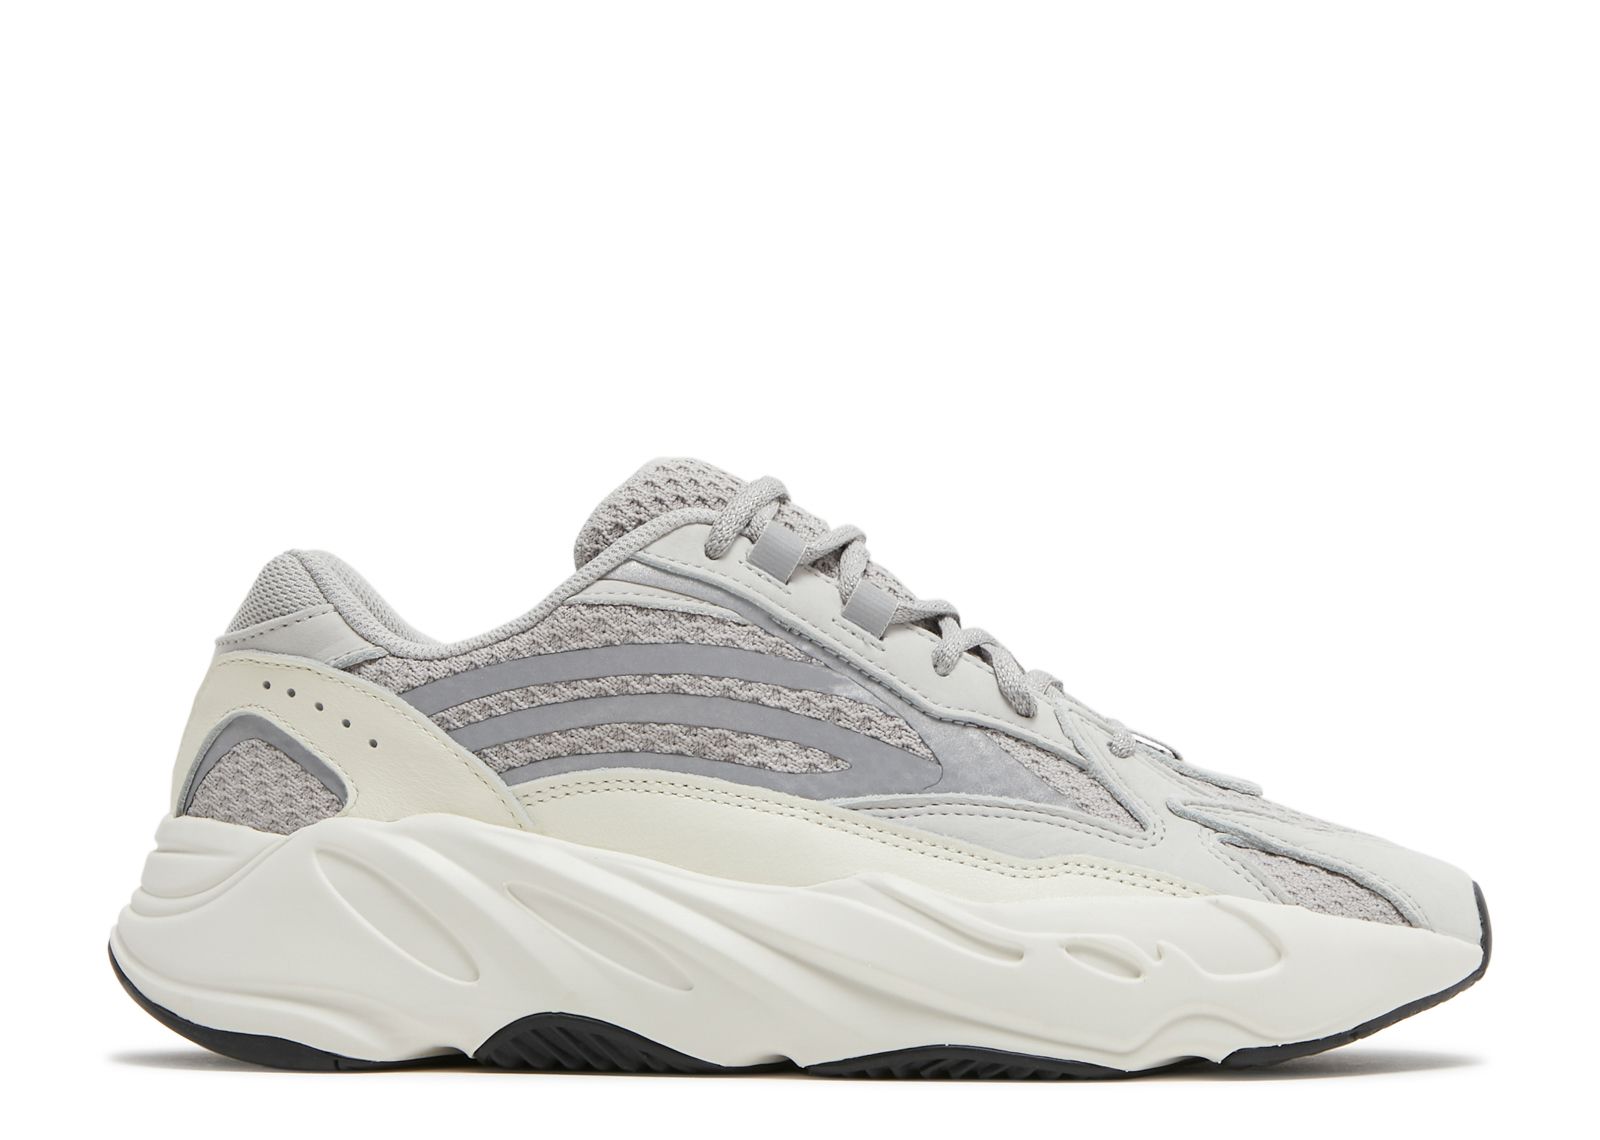 Yeezy Boost 700 V2 Static Wave Runner Sneakers by Adidas, available on flightclub.com for $450 Kendall Jenner Shoes Exact Product 